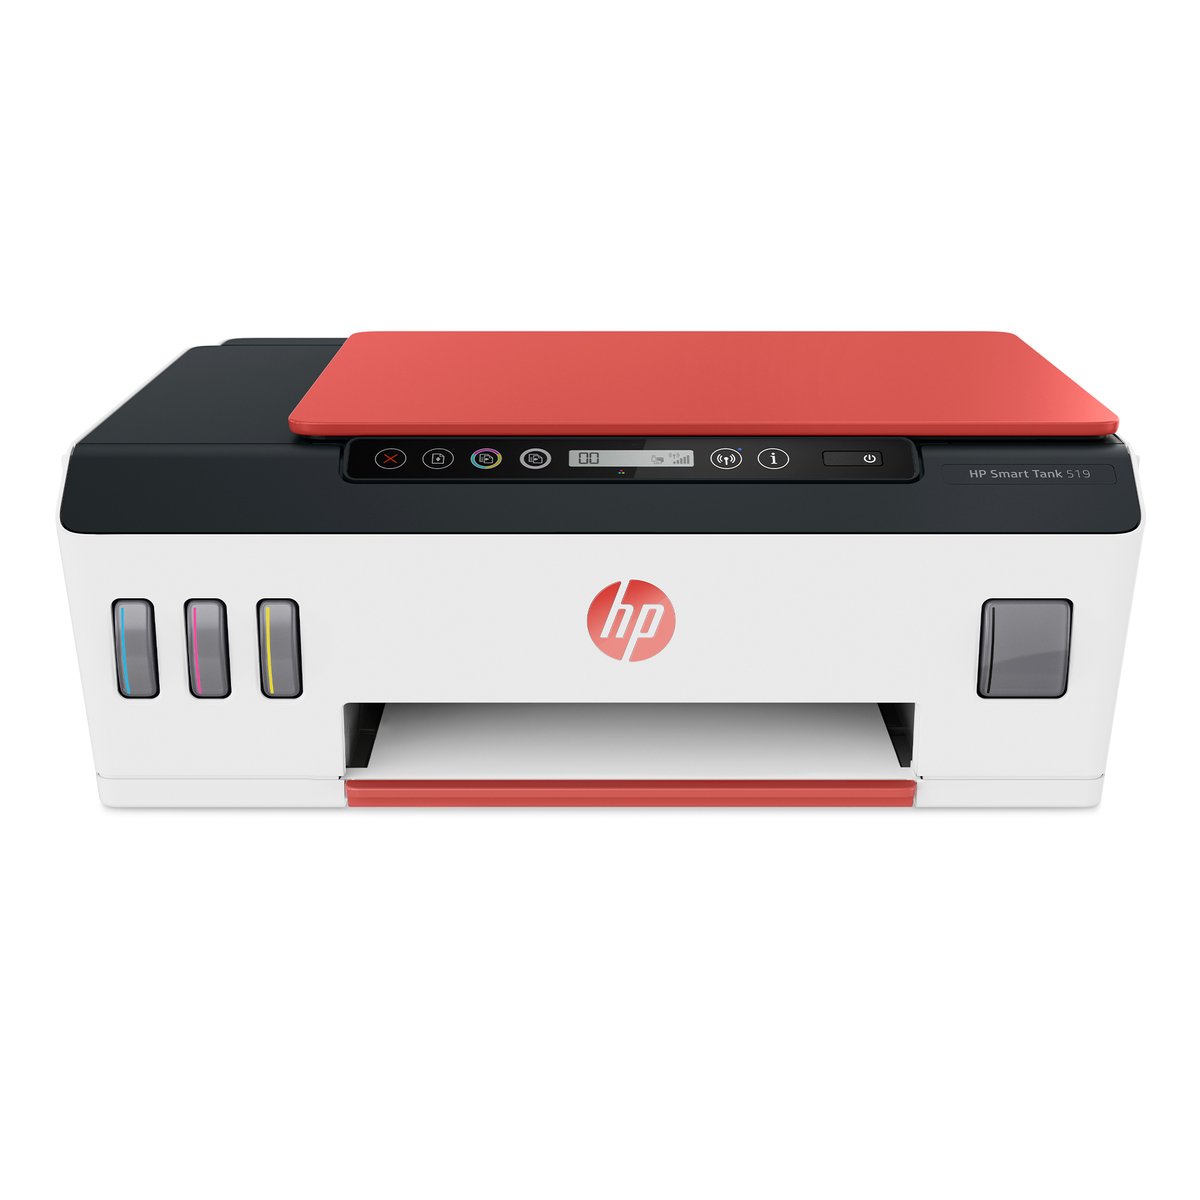 HP Smart Tank 519 All-in-One Wireless Ink Tank Printer (3YW73A), Red/White